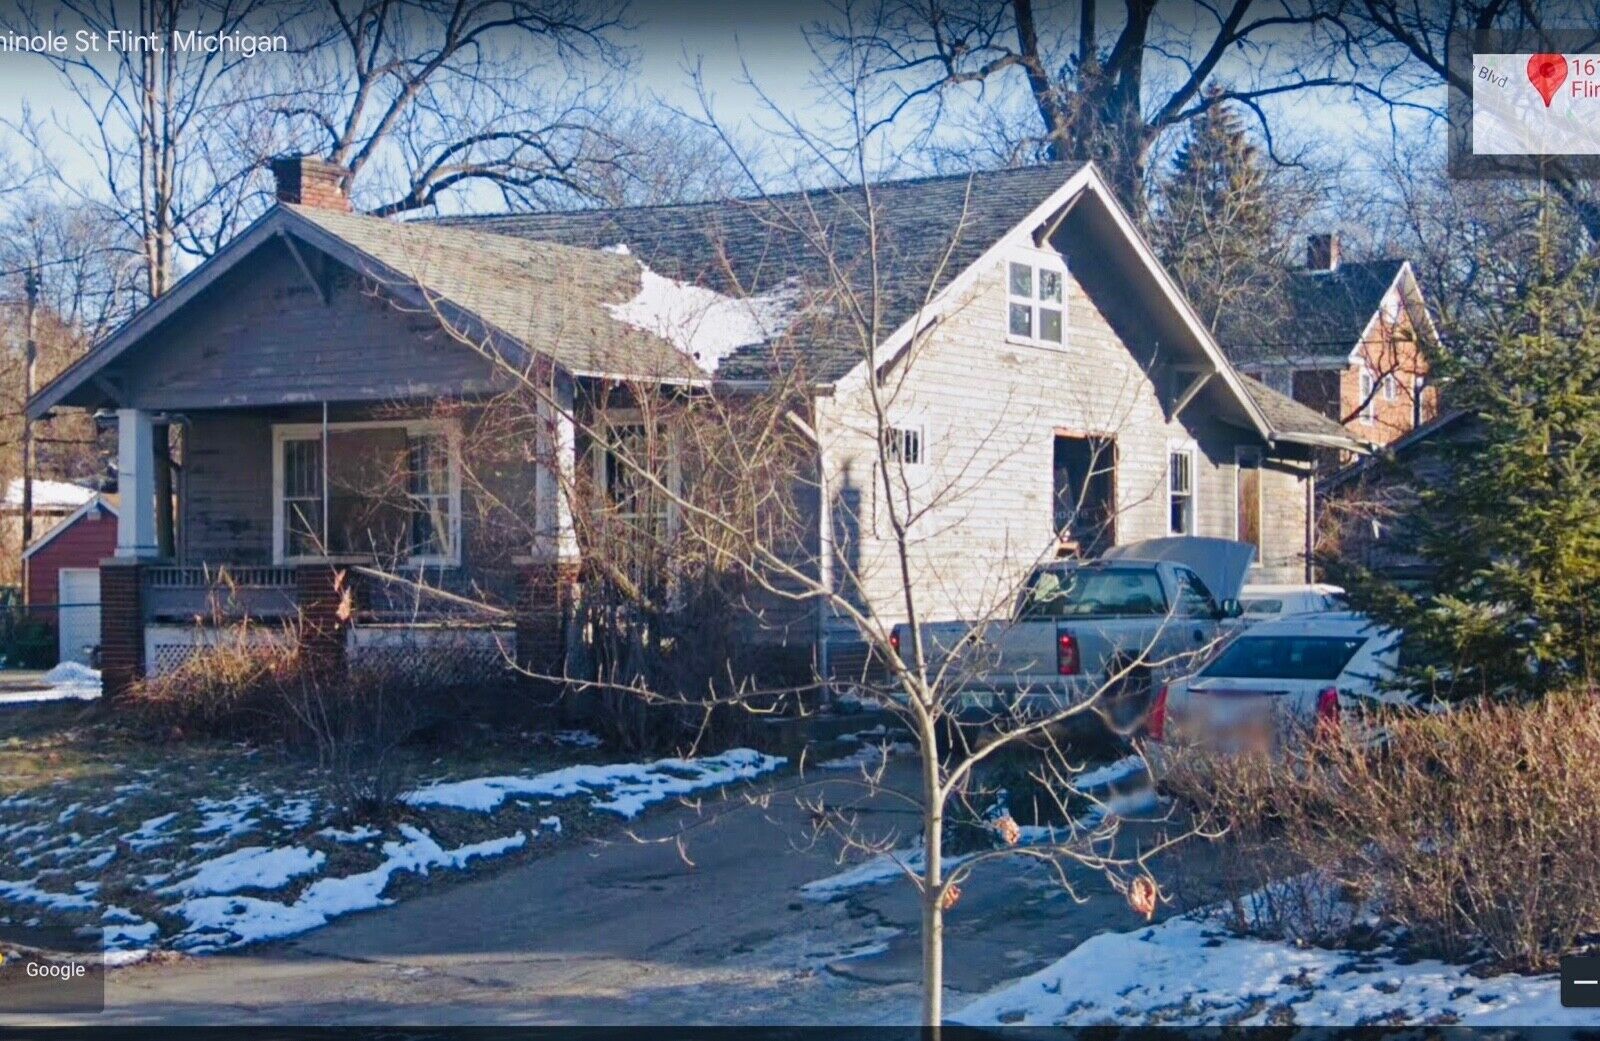 House for sale in Flint  Michigan- needs TLC